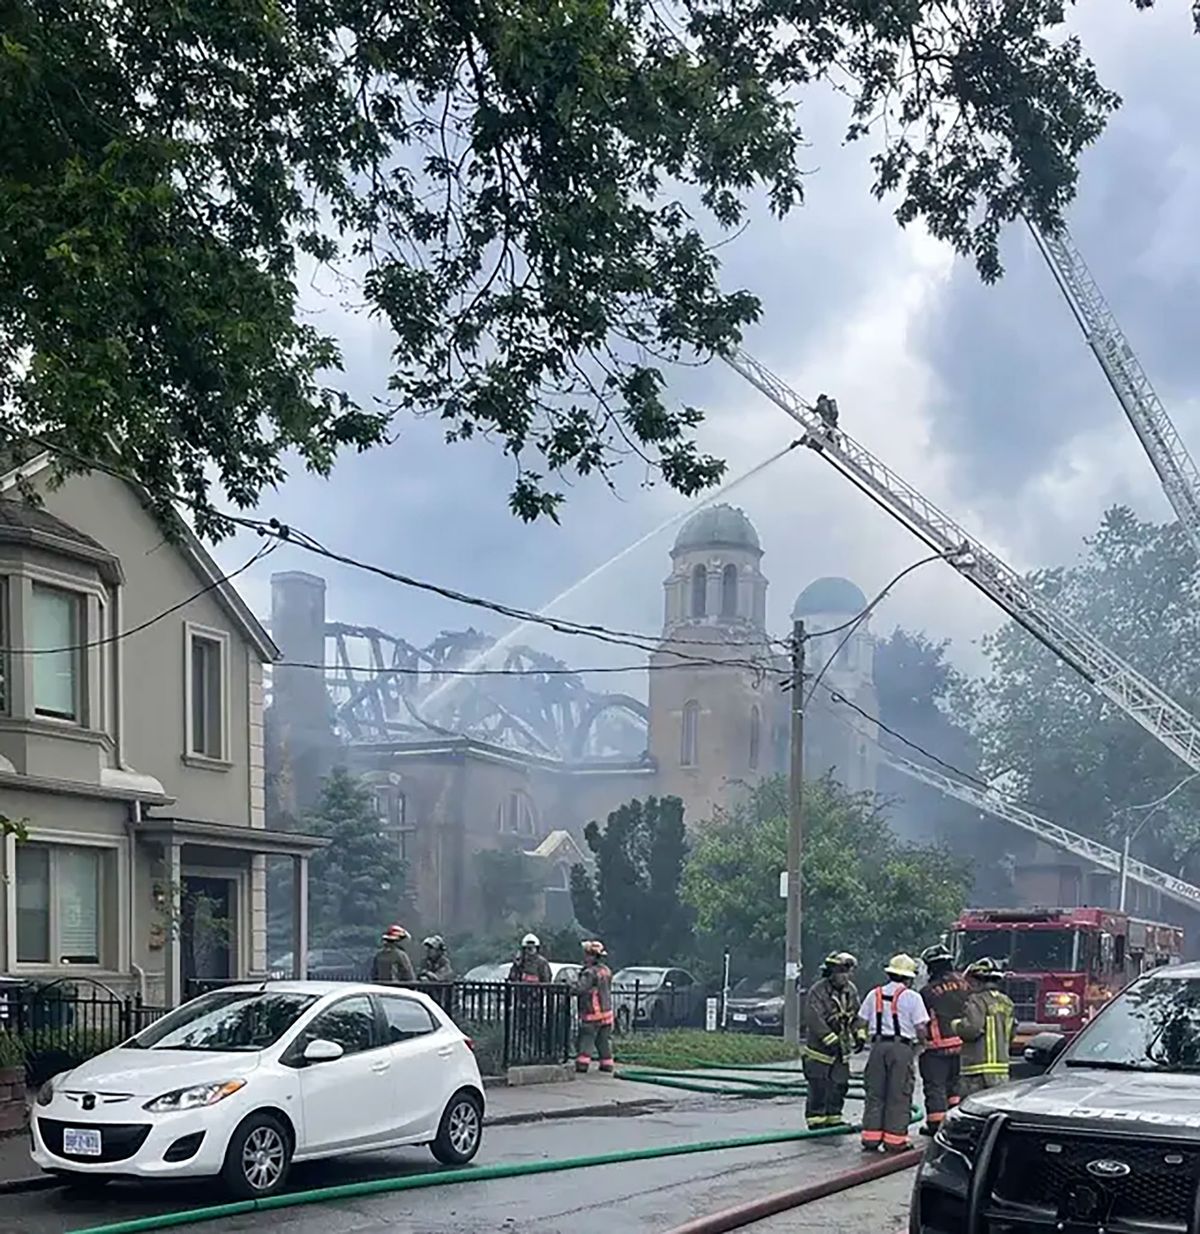 Firefighters battle the blaze at St Anne's Anglican Church in Toronto on 9 June Photo by VelvetGloveinTO, via Wikimedia Commons